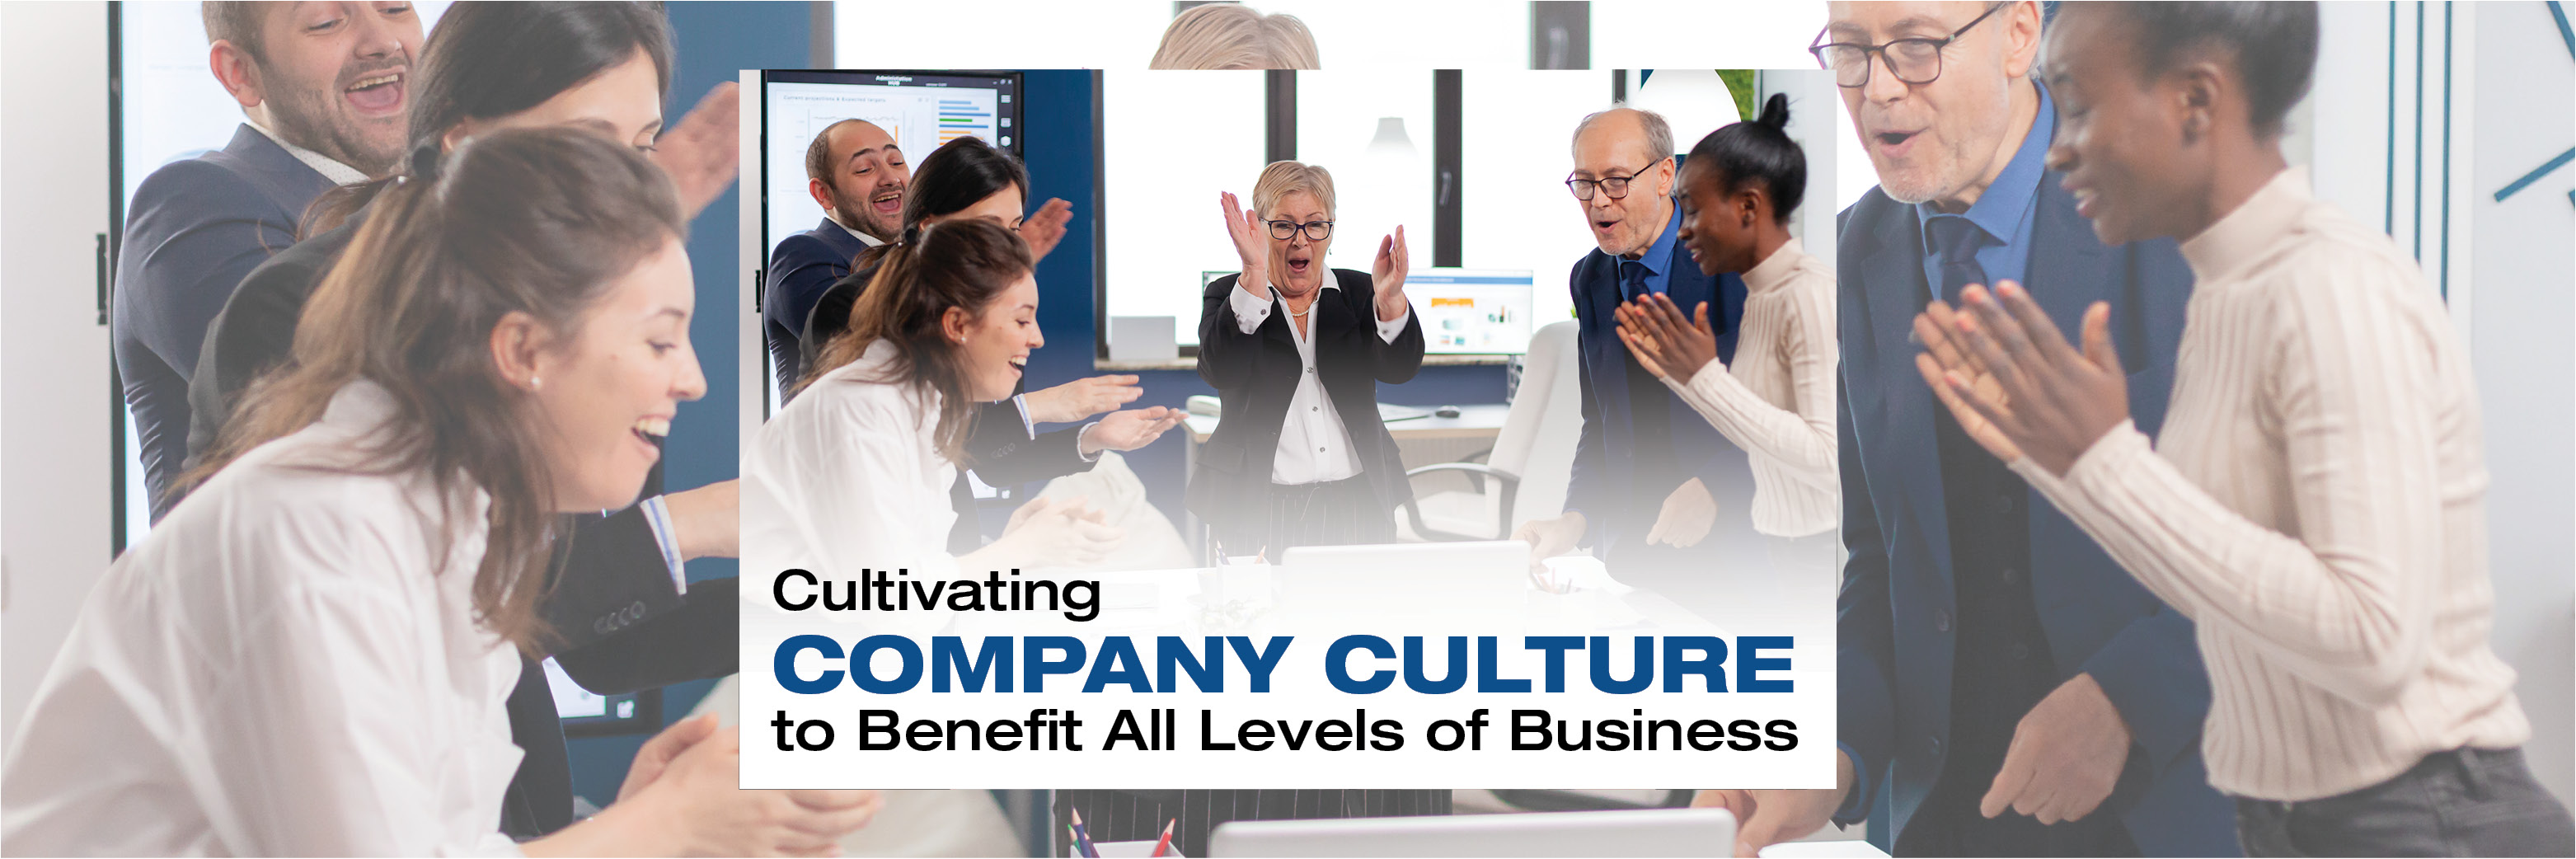 Cultivating Company Culture to Benefit All Levels of Business